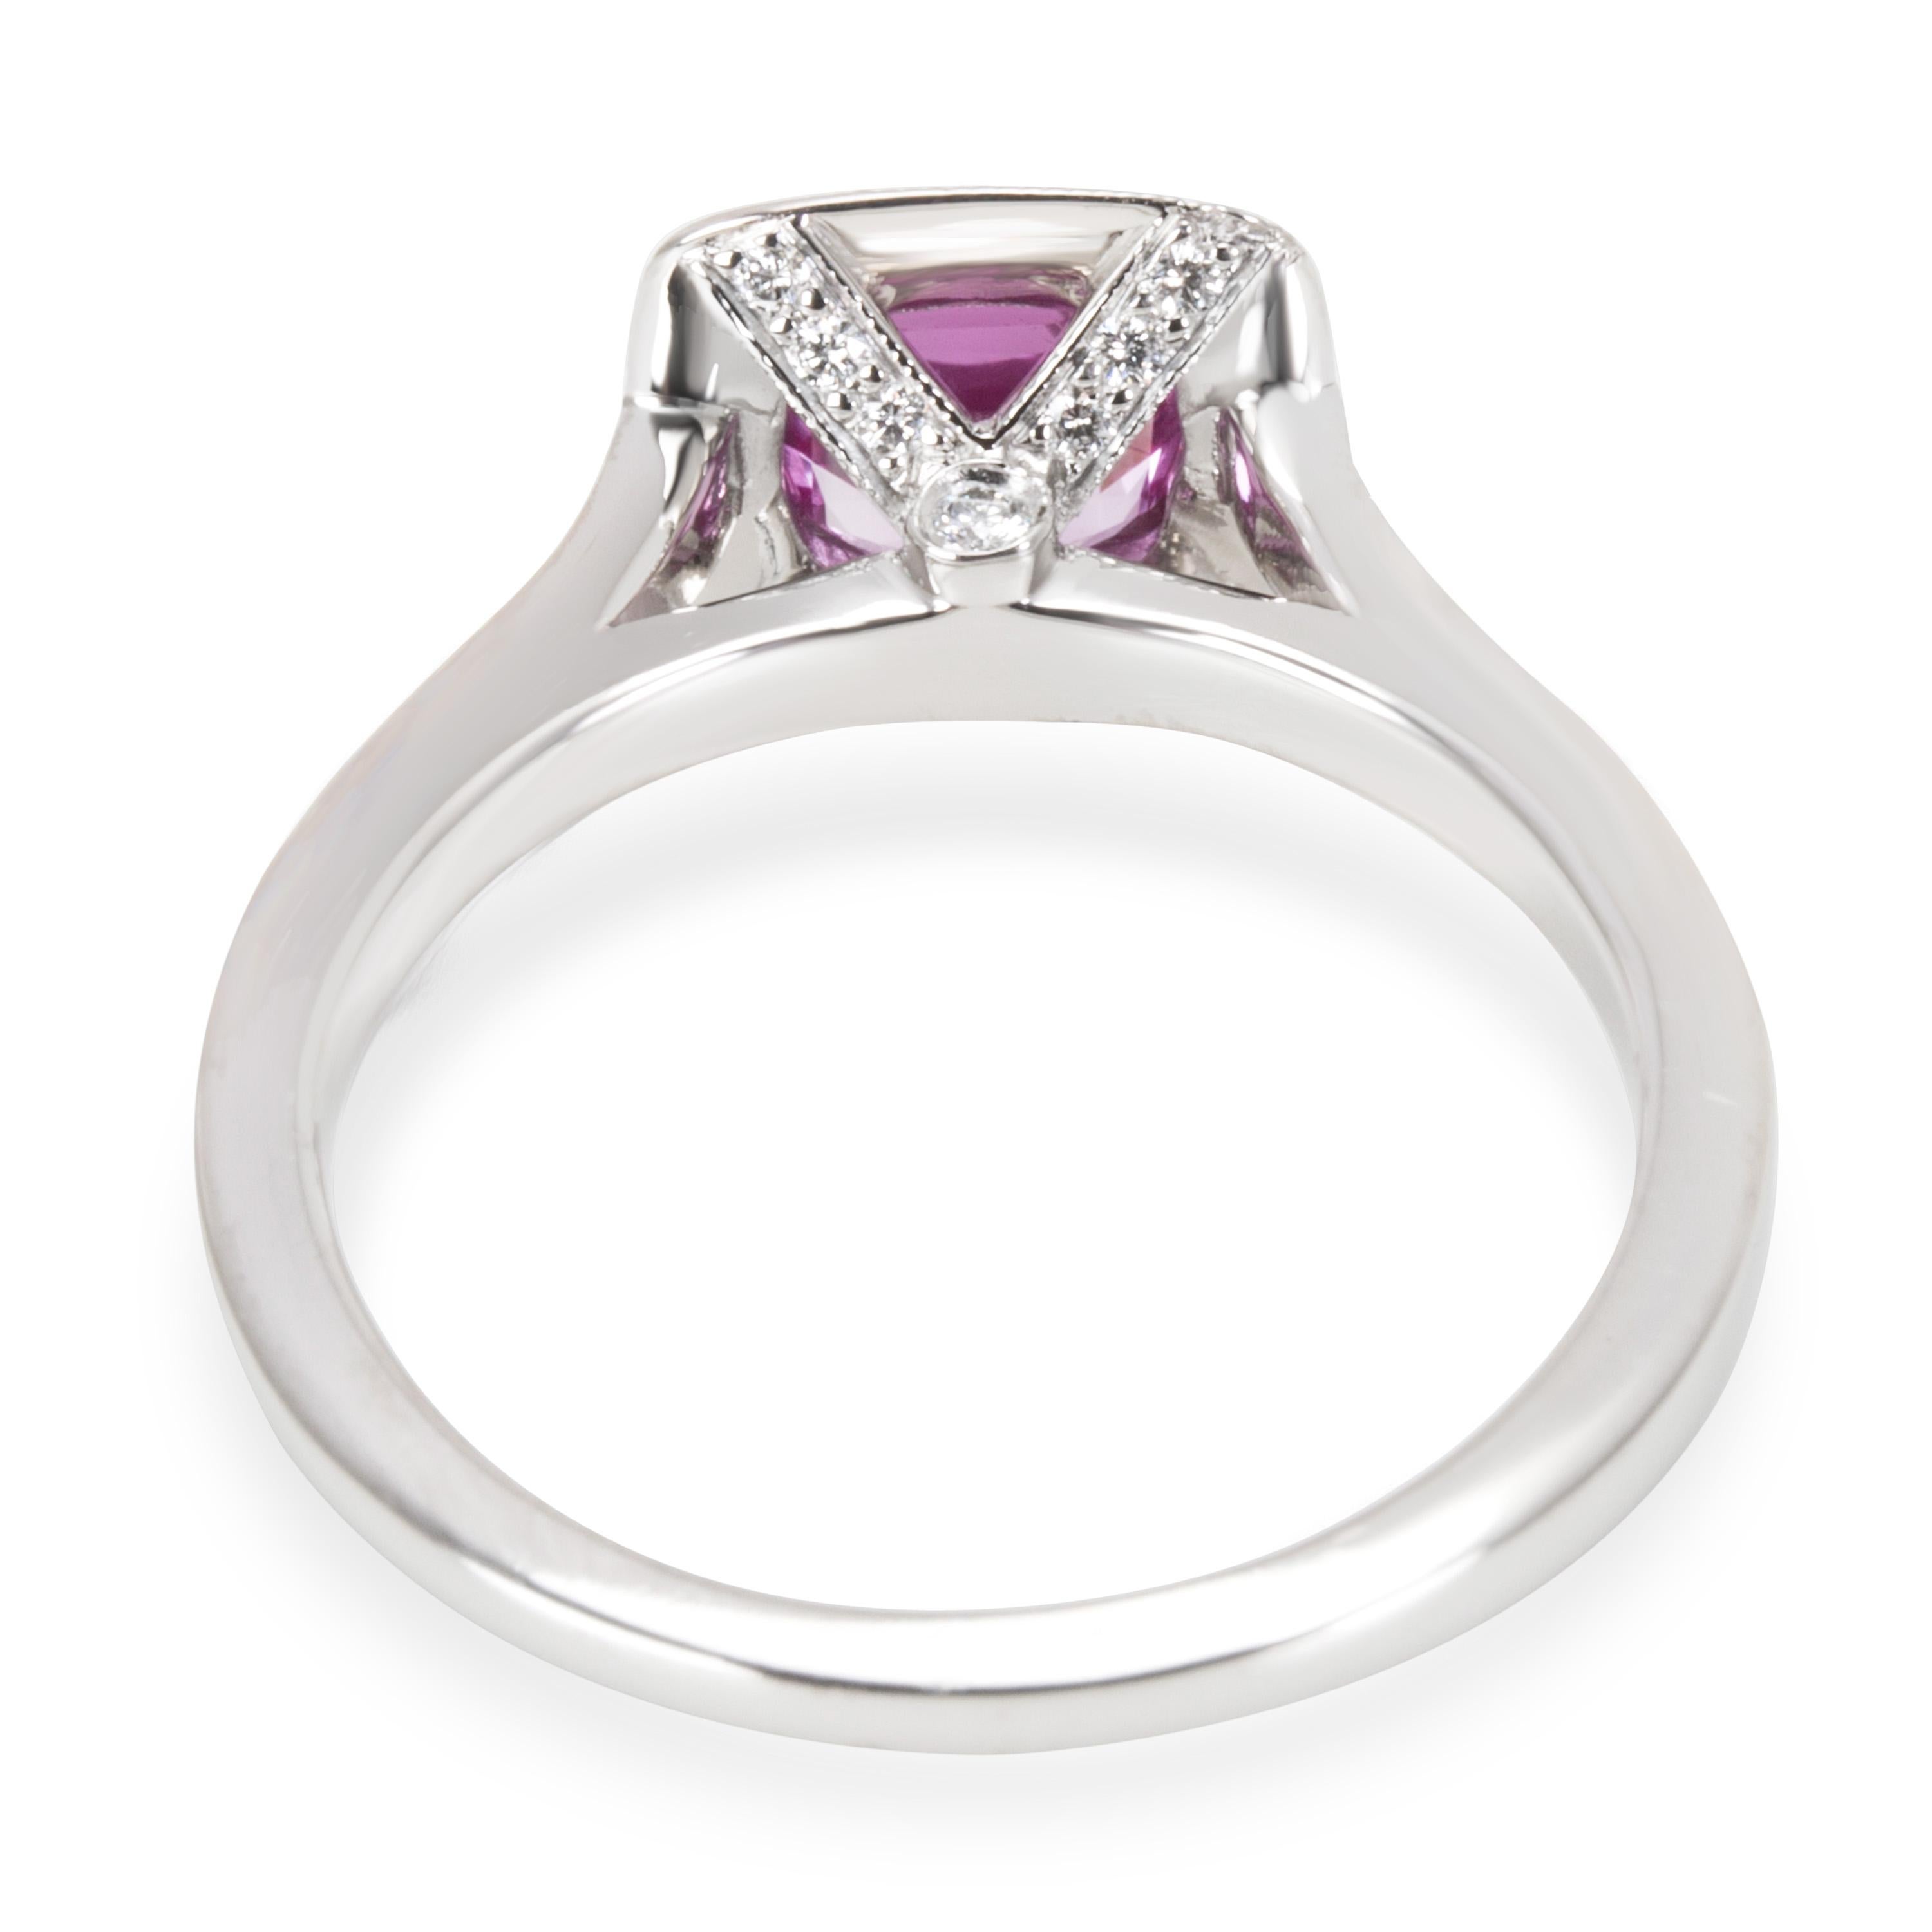 Tiffany & Co. Legacy Pink Sapphire & Diamond Ring in Platinum

PRIMARY DETAILS
SKU: 097959
Listing Title: Tiffany & Co. Legacy Pink Sapphire & Diamond Ring in Platinum
Condition Description: Retail price 14,500 USD. In excellent condition and